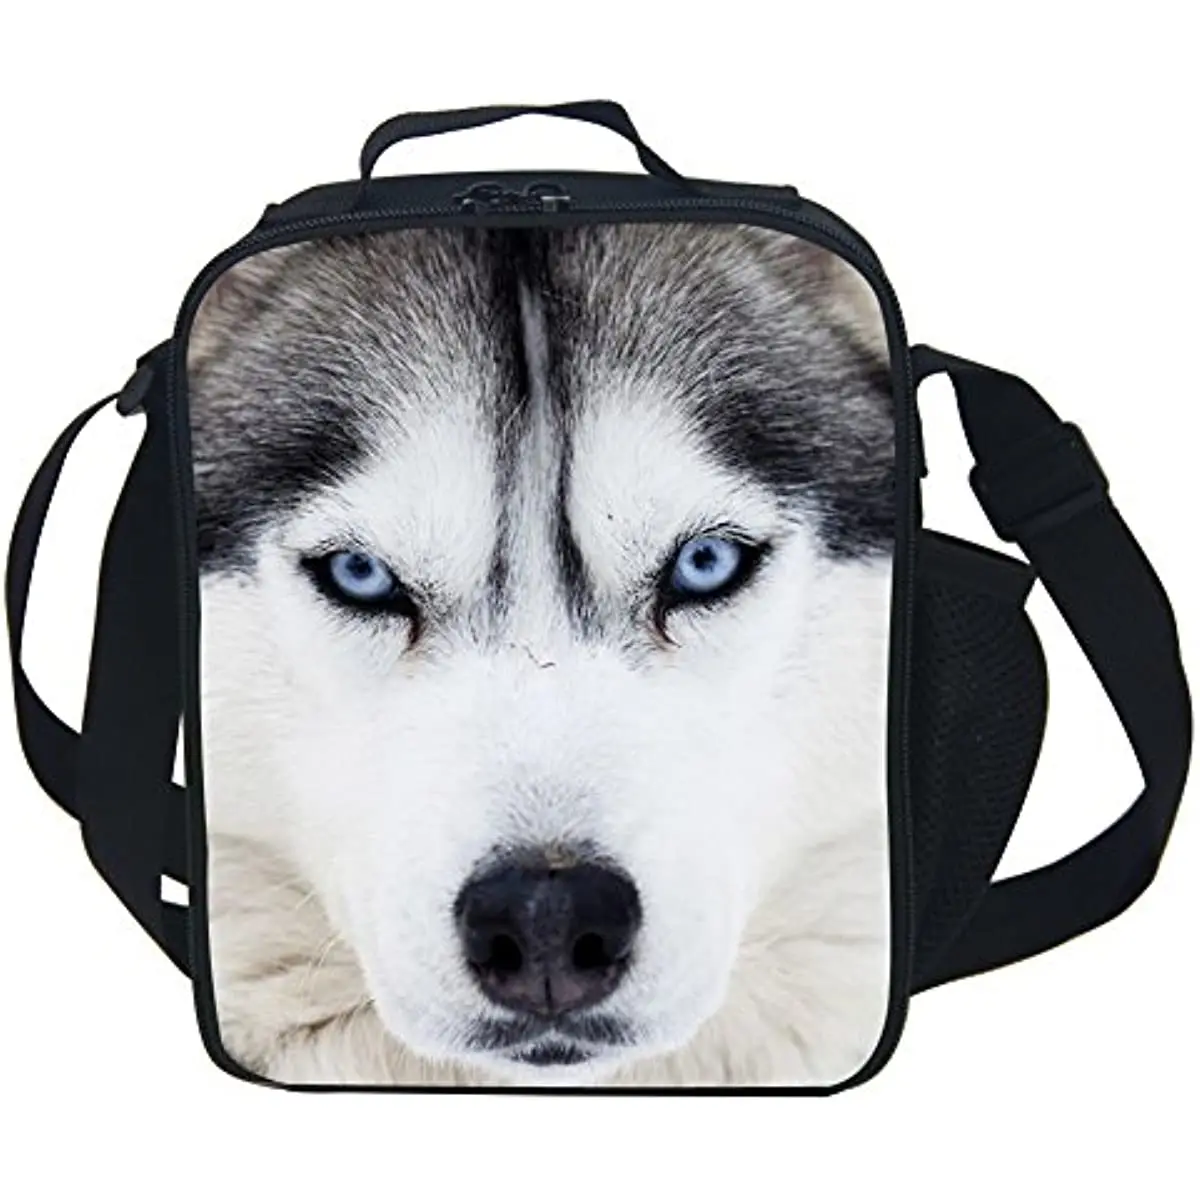 

Animal Husky Insulated Lunch Box Cooler Bag Dog Lunch Bags for Boy Men Kids Bento Lunch Bags for Children Food Bags One Size